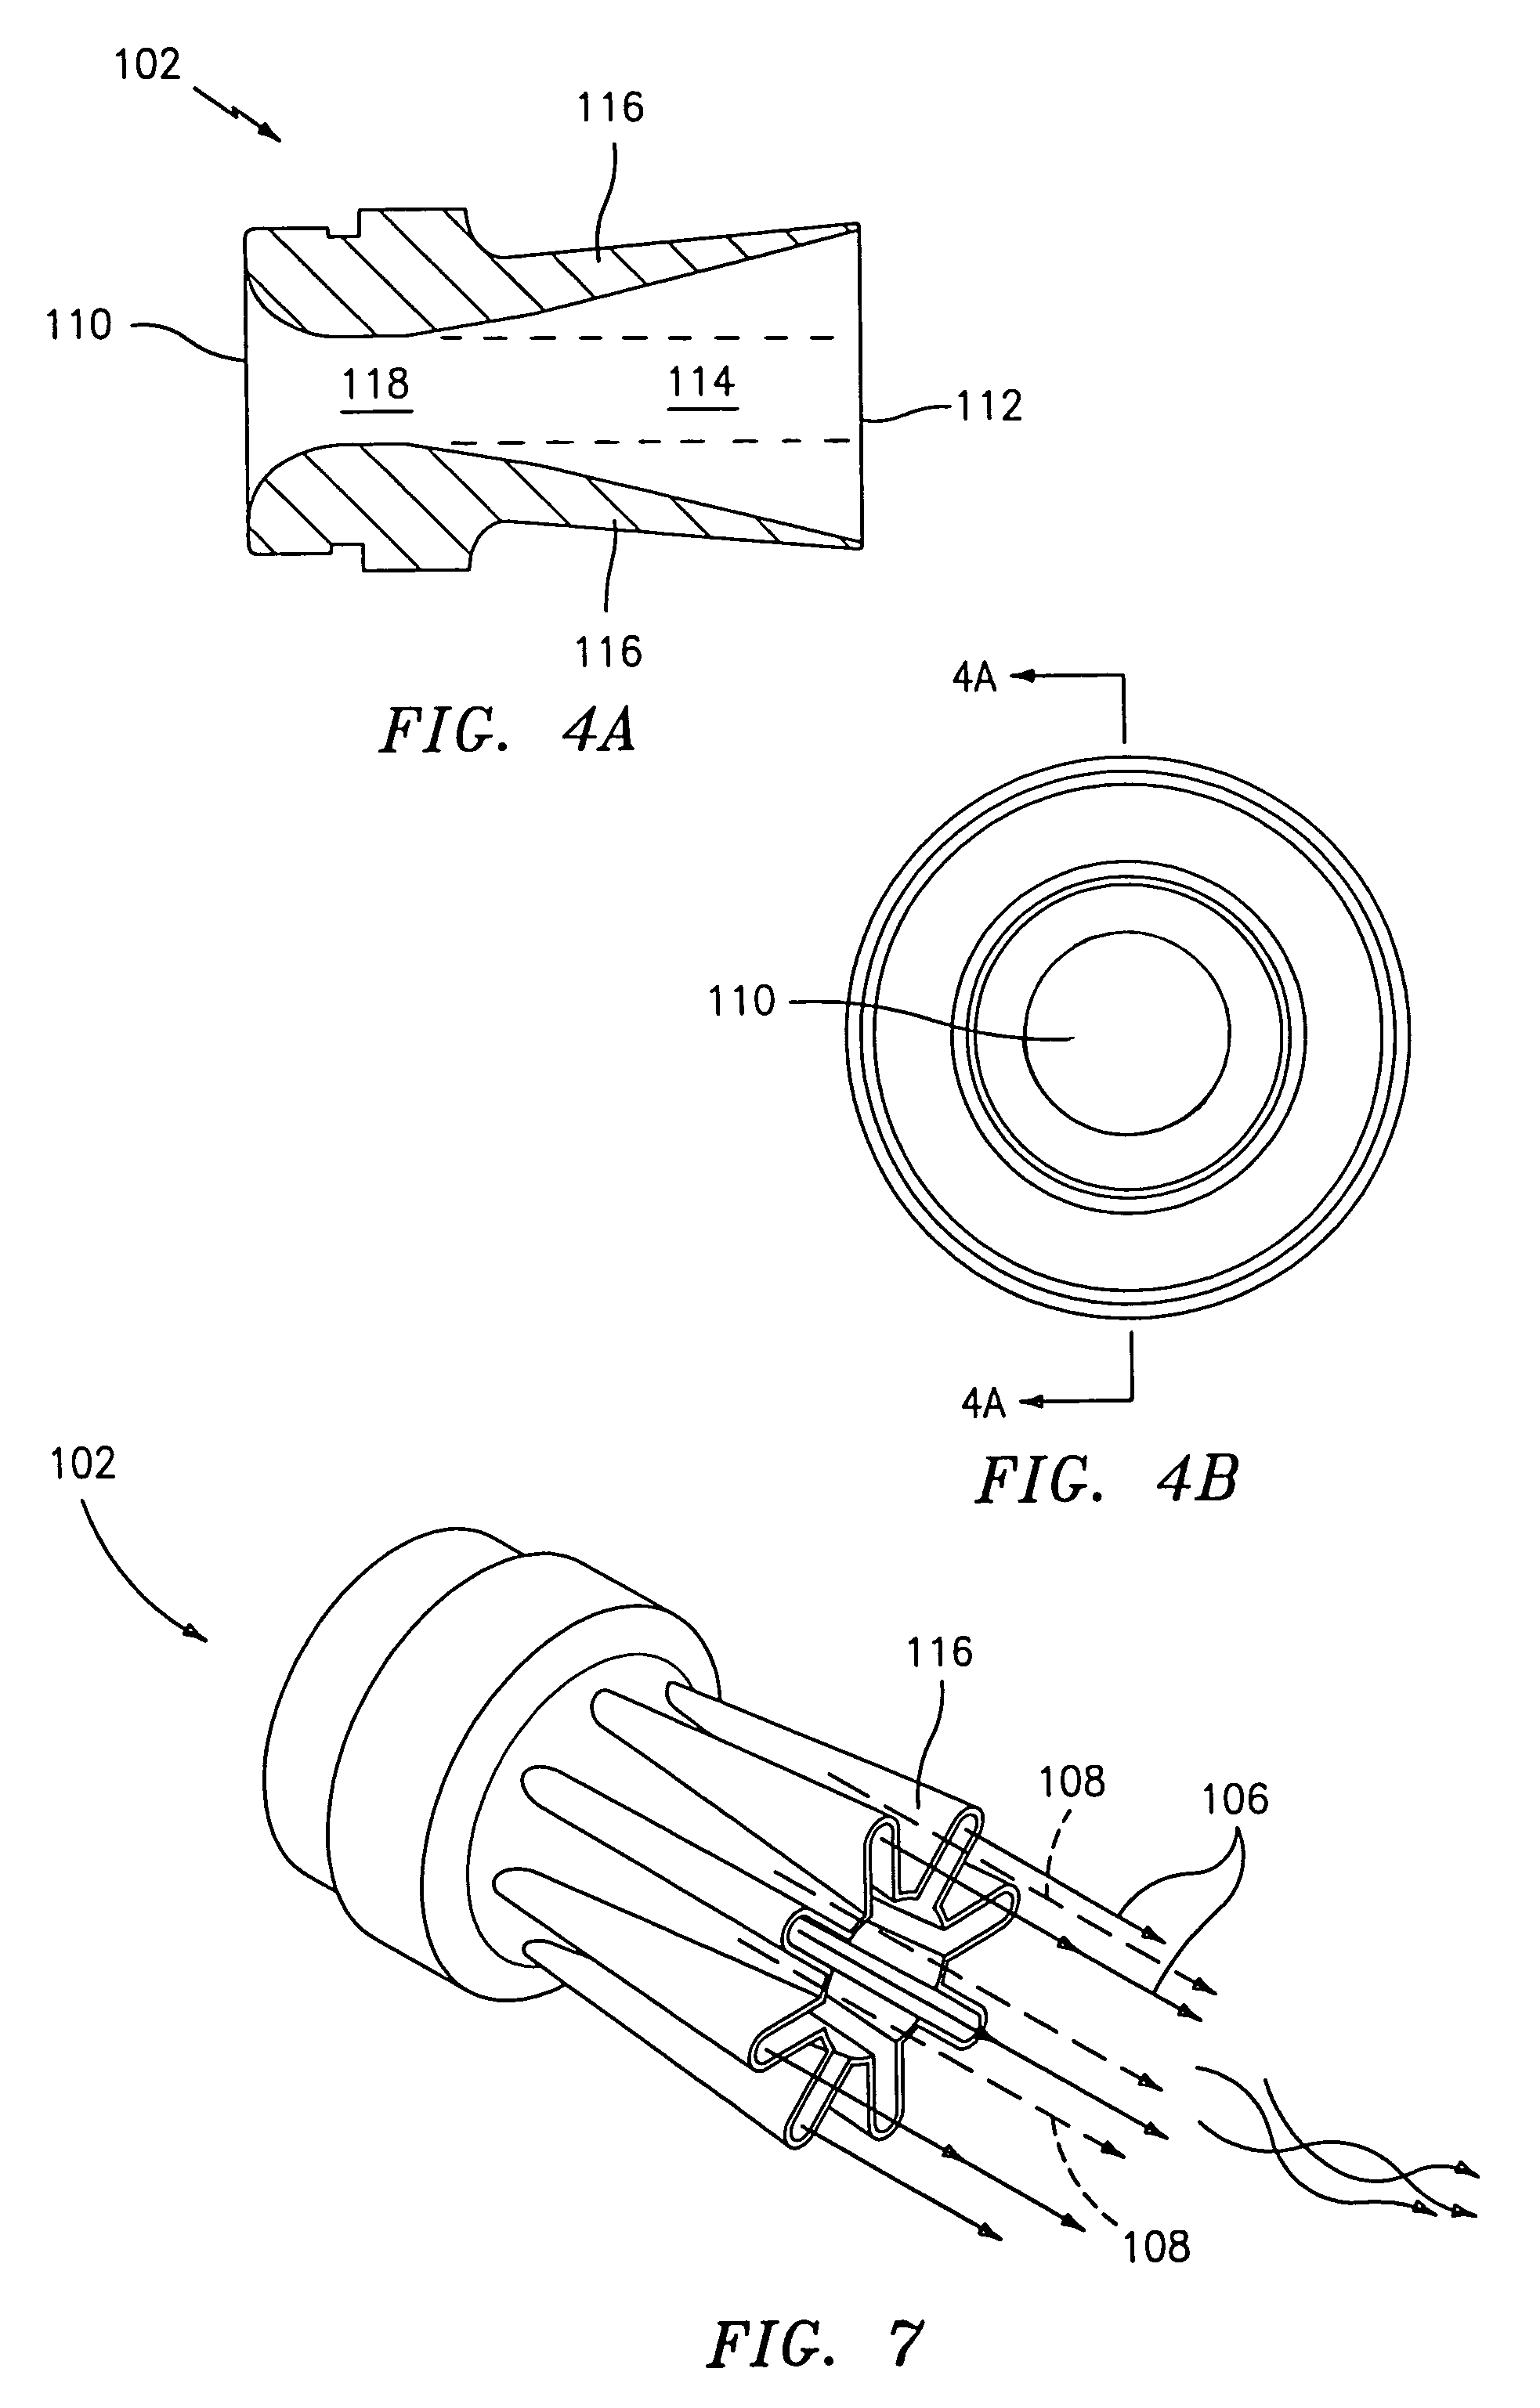 Lobed convergent/divergent supersonic nozzle ejector system